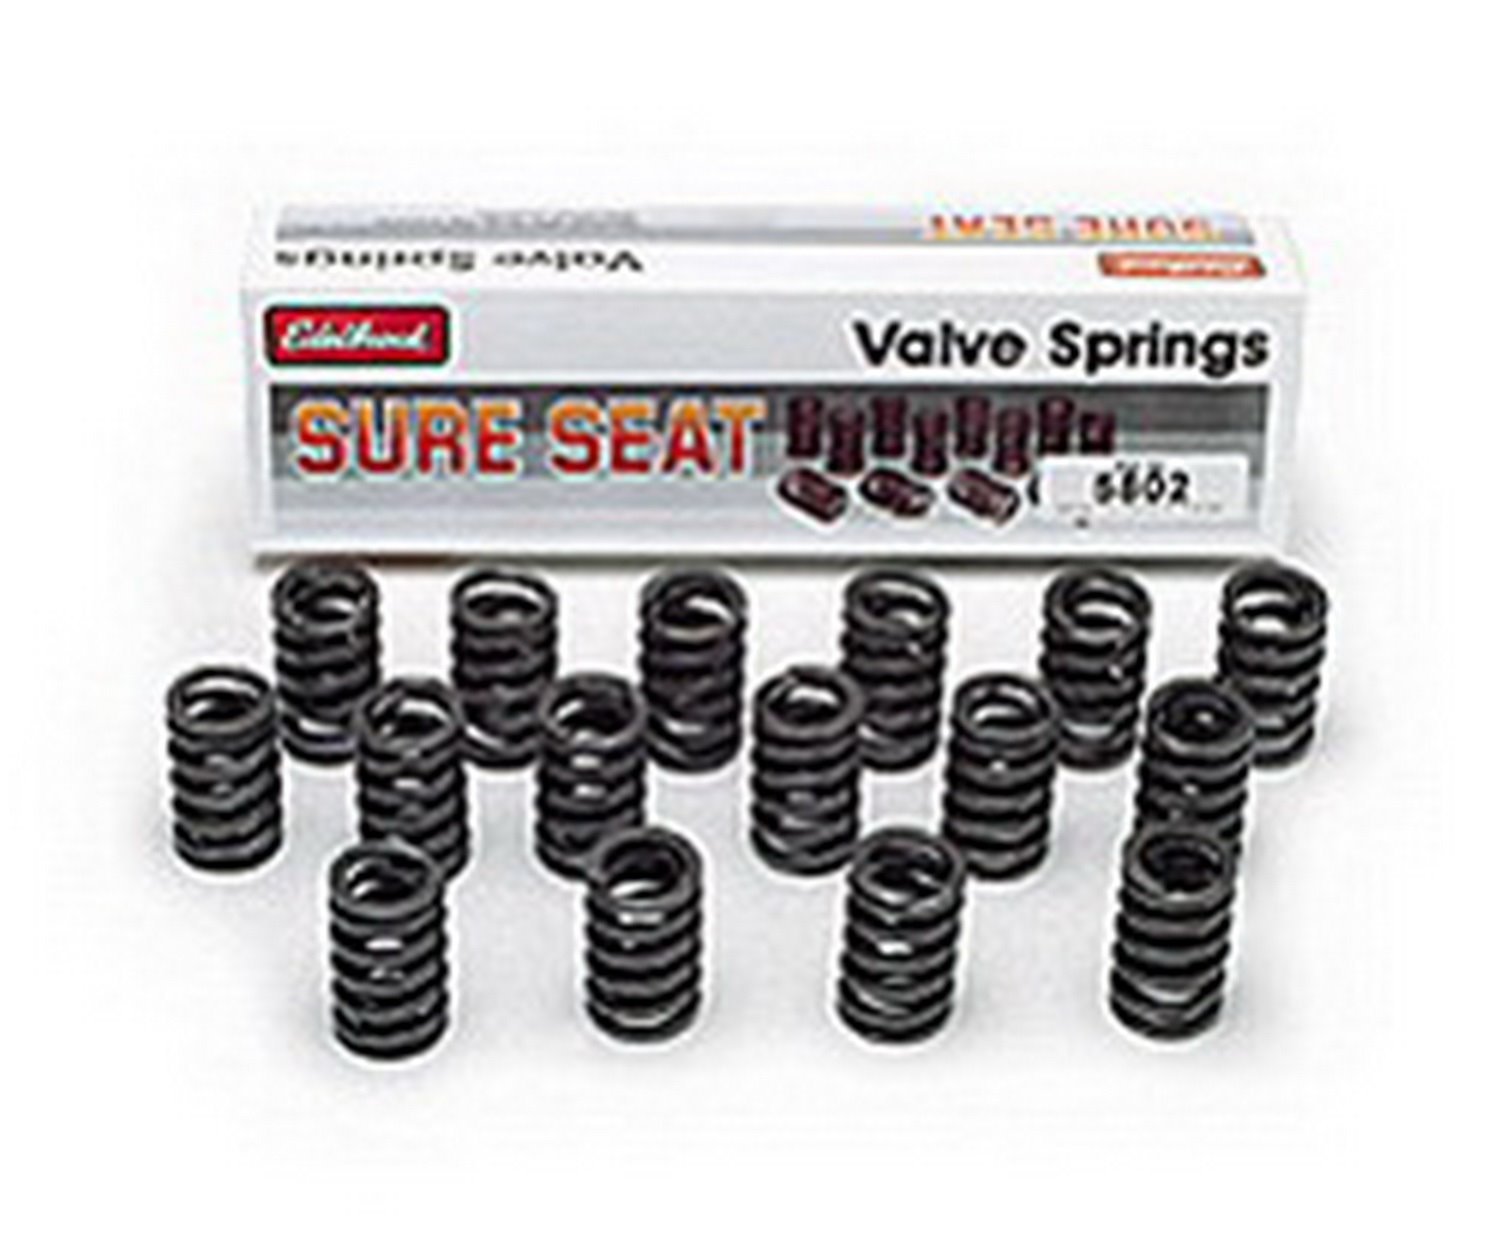 Sure Seat Valve Springs for 1957-1995 Small Block Chevy 262-400 OE Cast Iron Head Non-Rotator